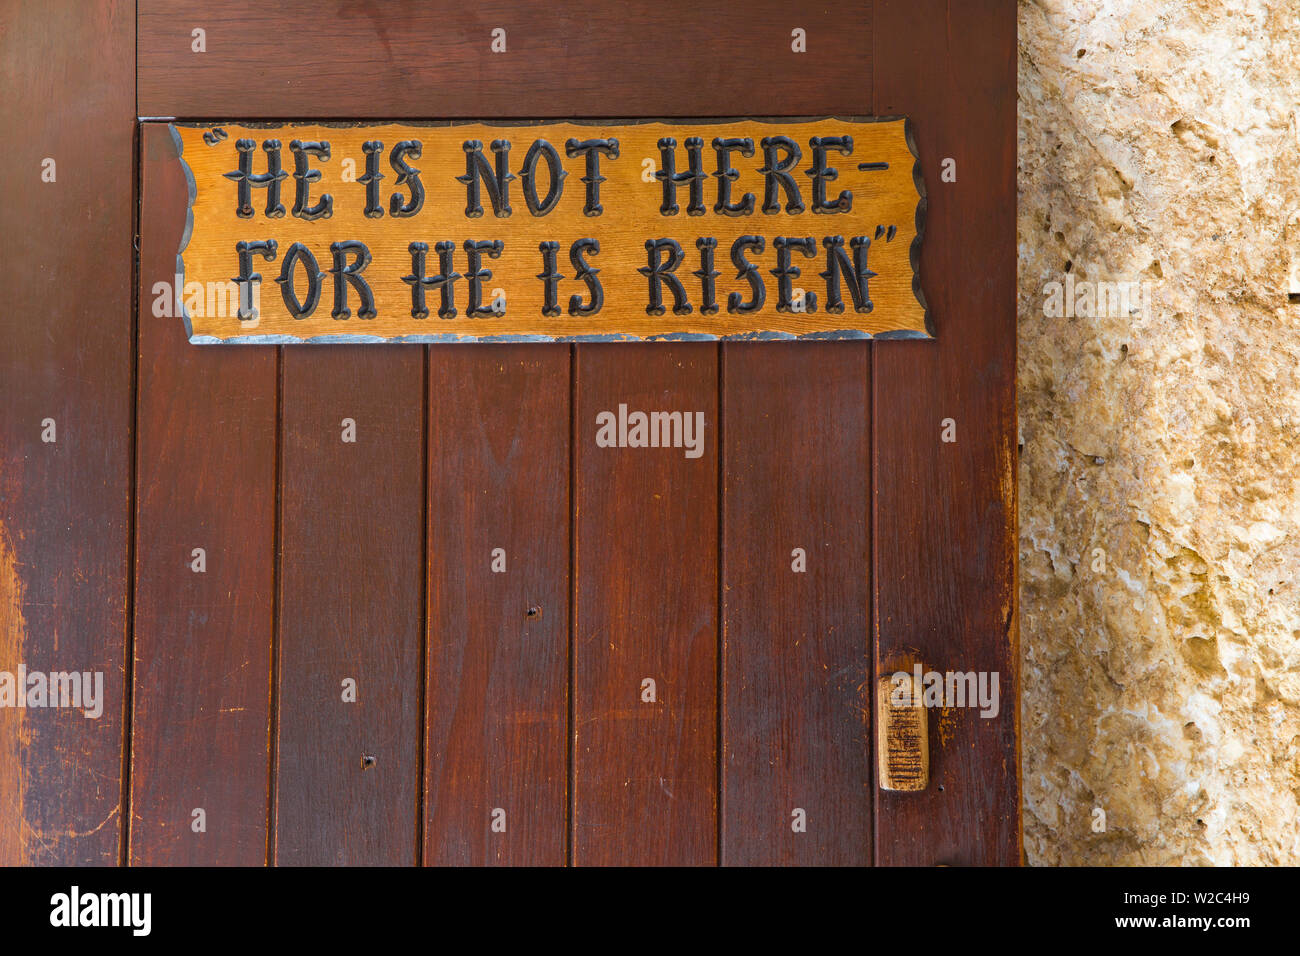 Israel, Jerusalem, The Garden Tomb, a possible site of the burial and resurrection of Jesus, Wooden door bearing the  words, 'He is not here - for he is risen.' Stock Photo